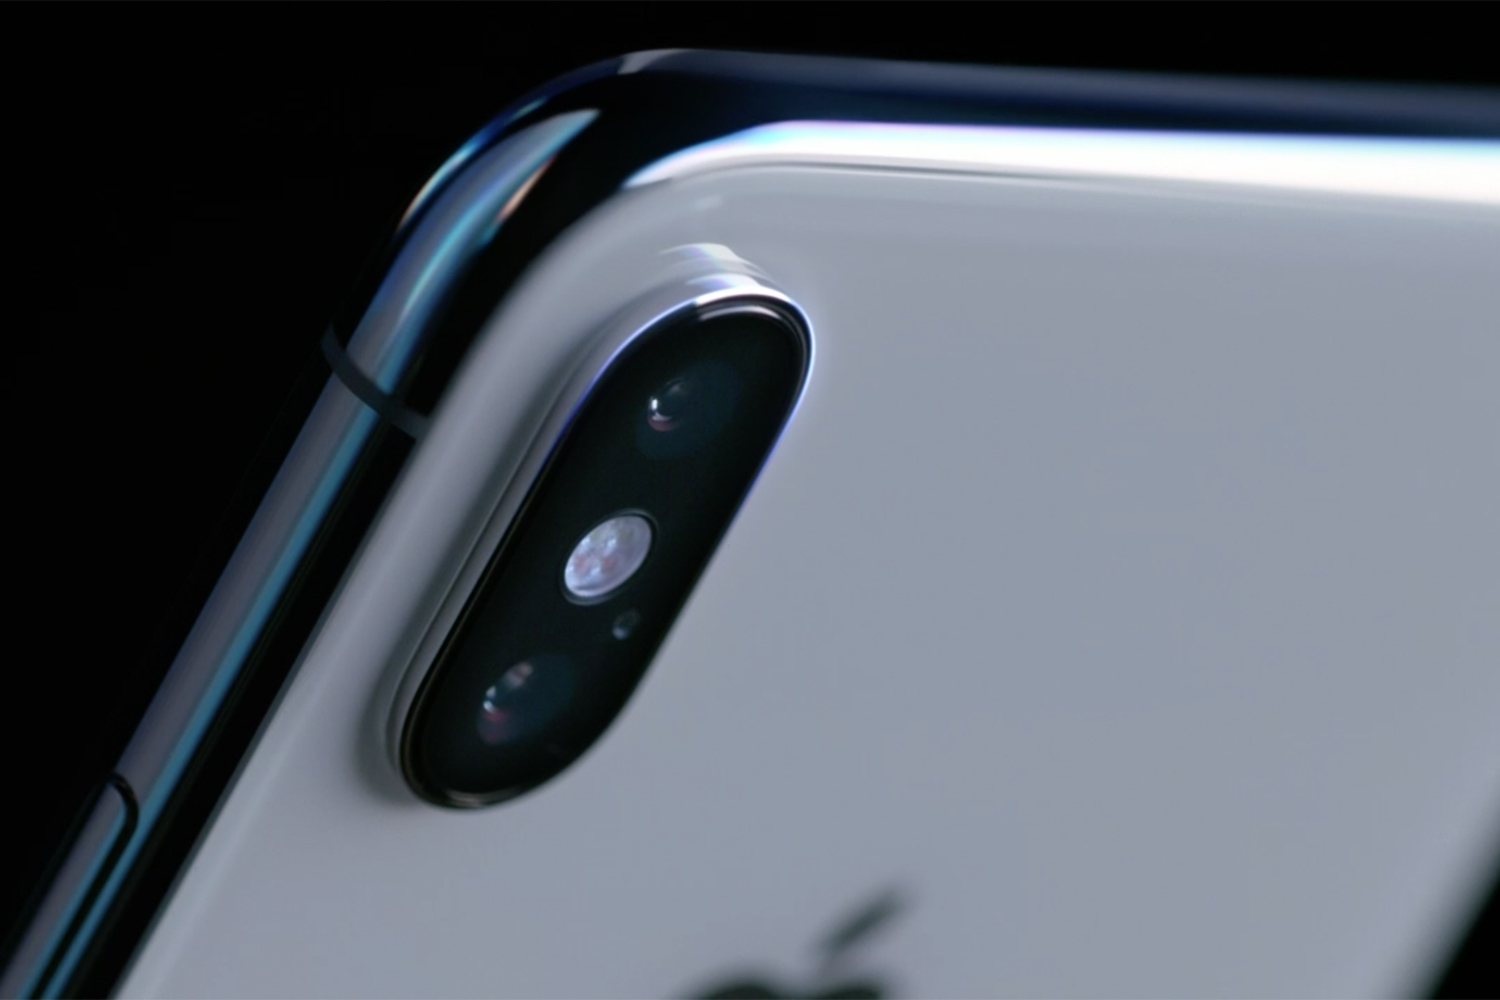 Apple iPhone X Explained: Features, Price, Specs, and More